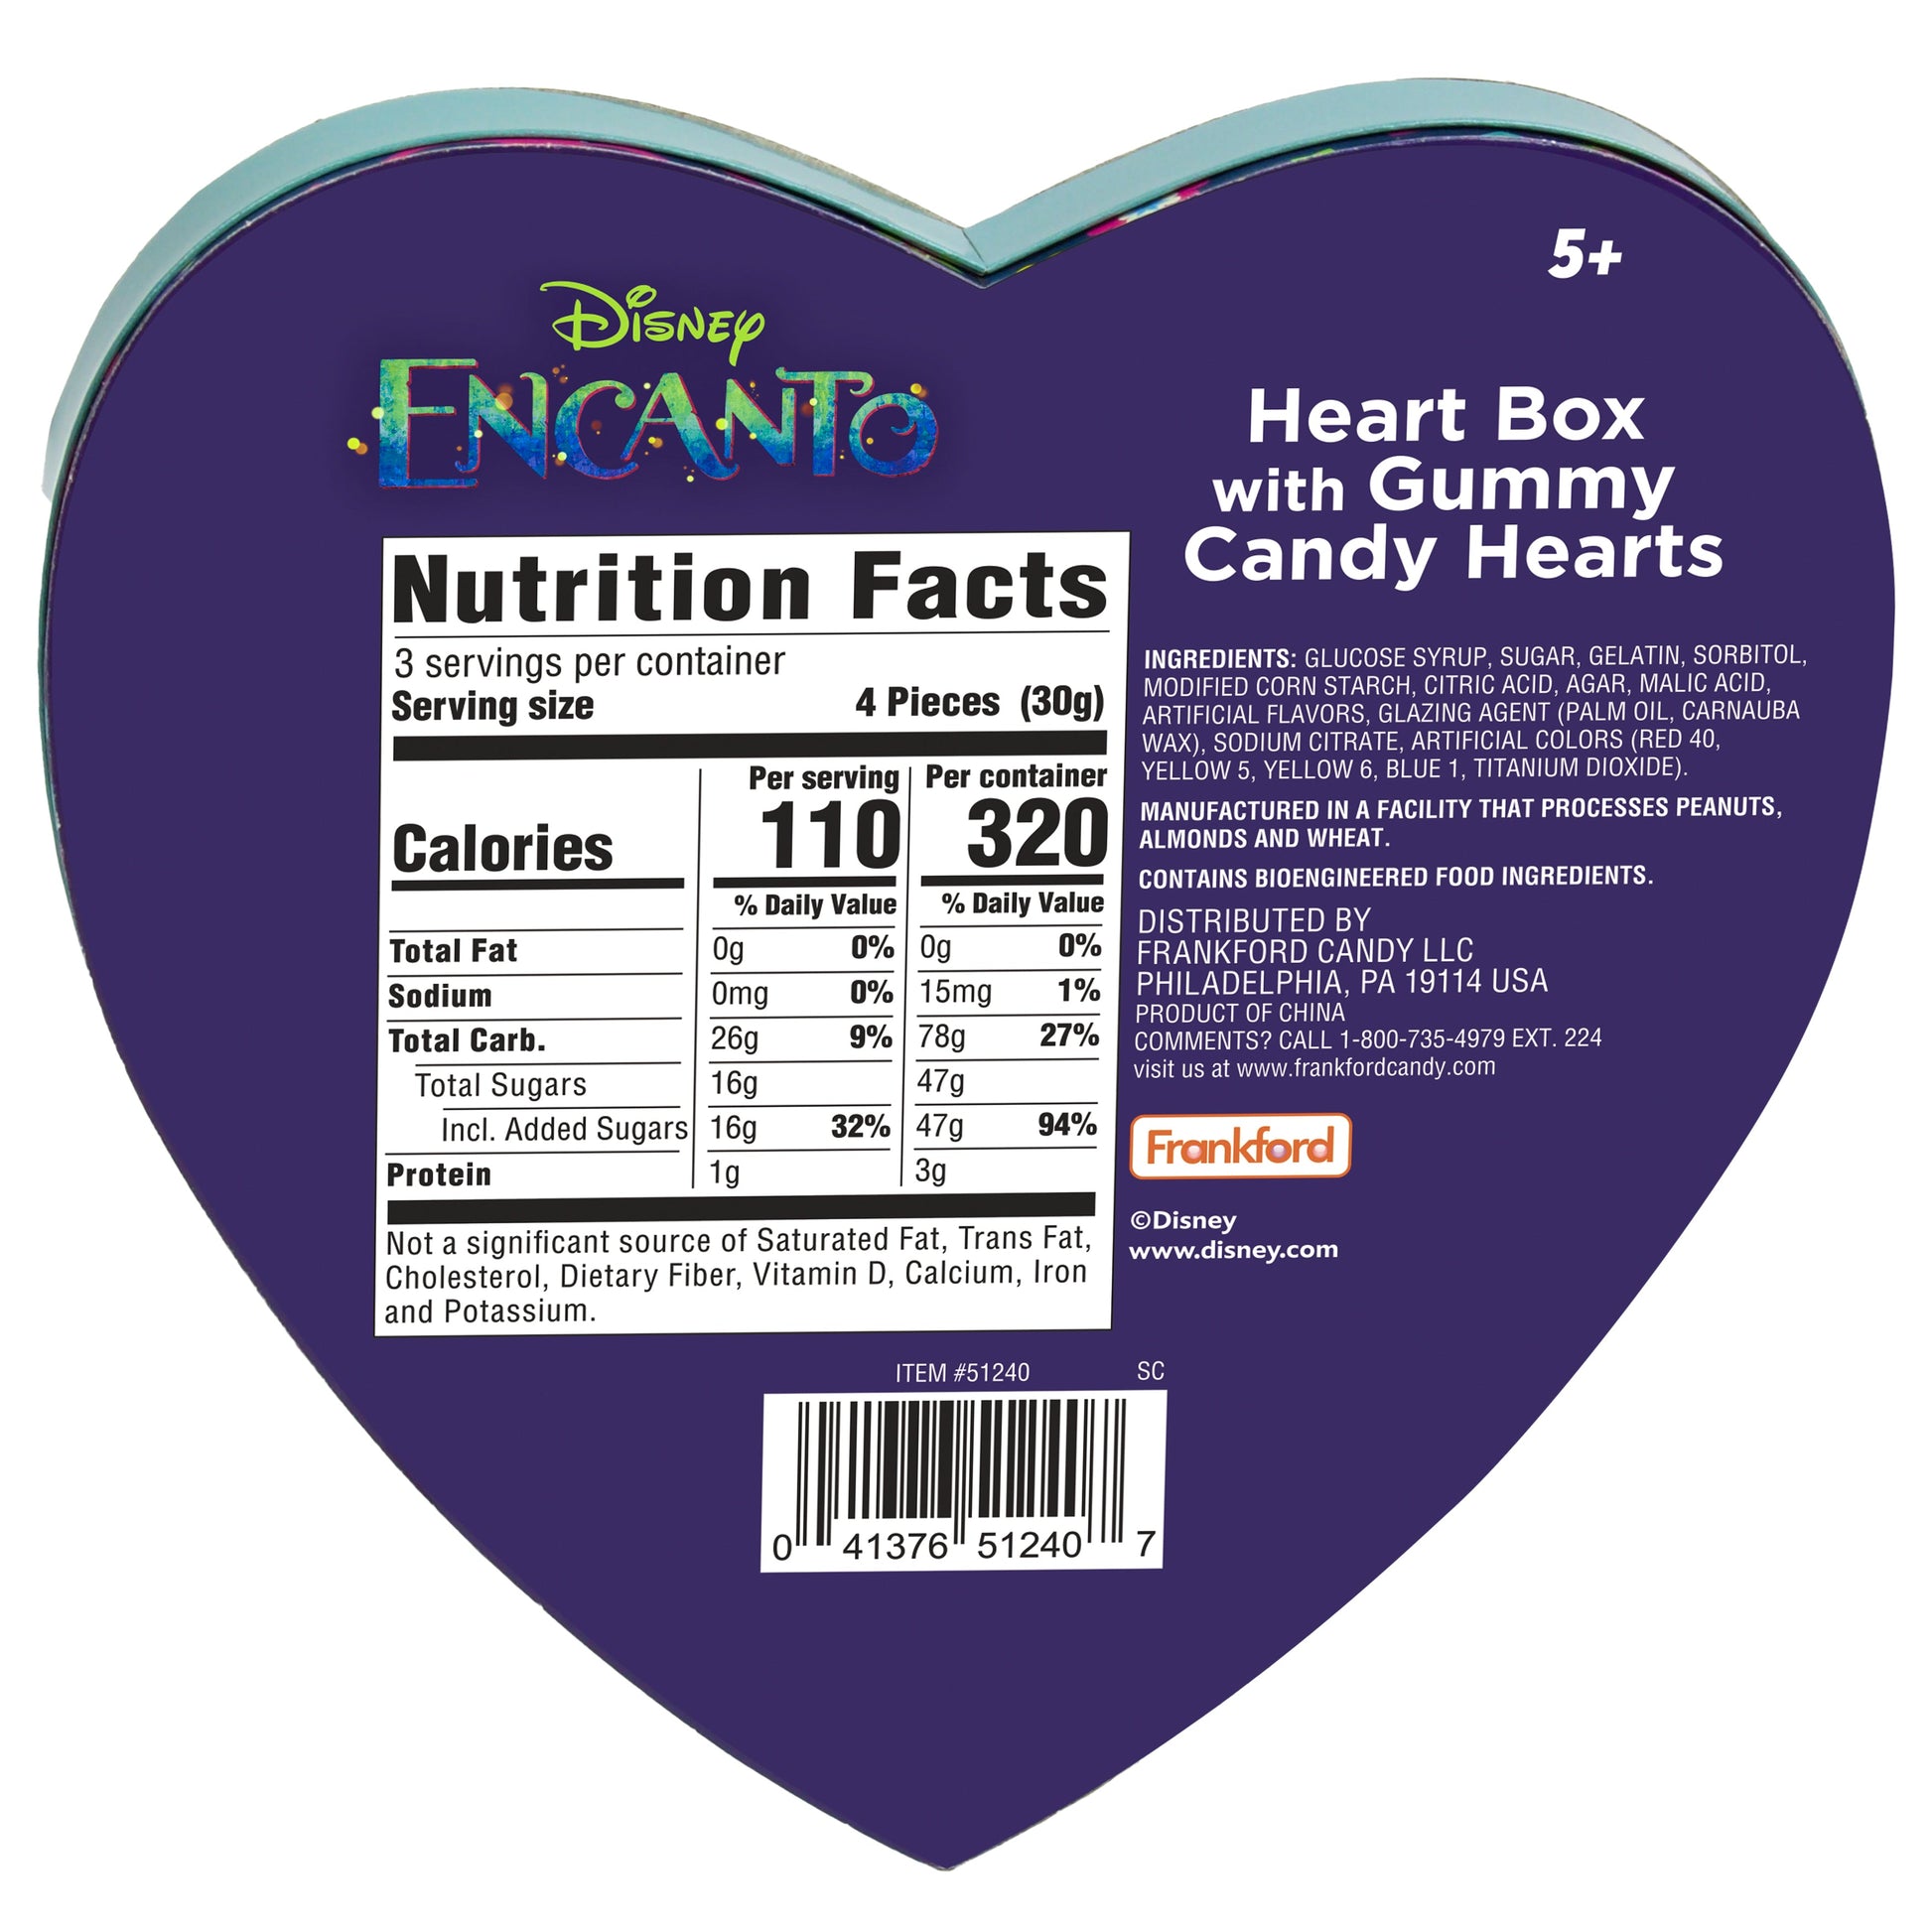 Blue back of heart shaped box with nutrition facts and ingredients